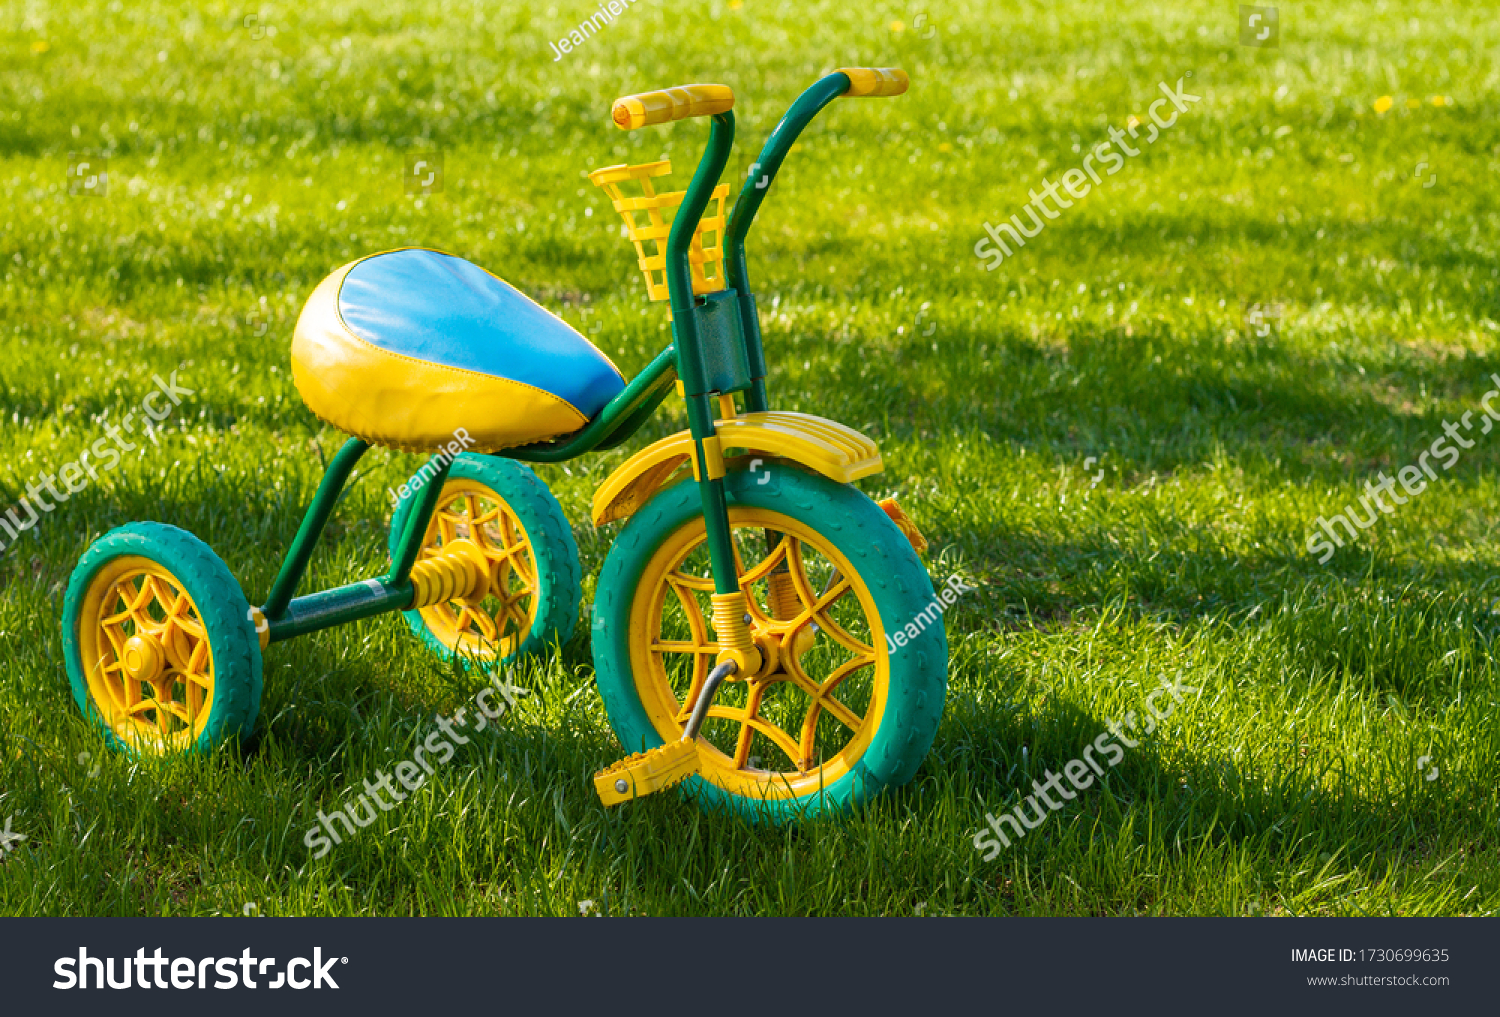 Small yellow and green children's tricycle standing on the grass on a sunny day. Copy space